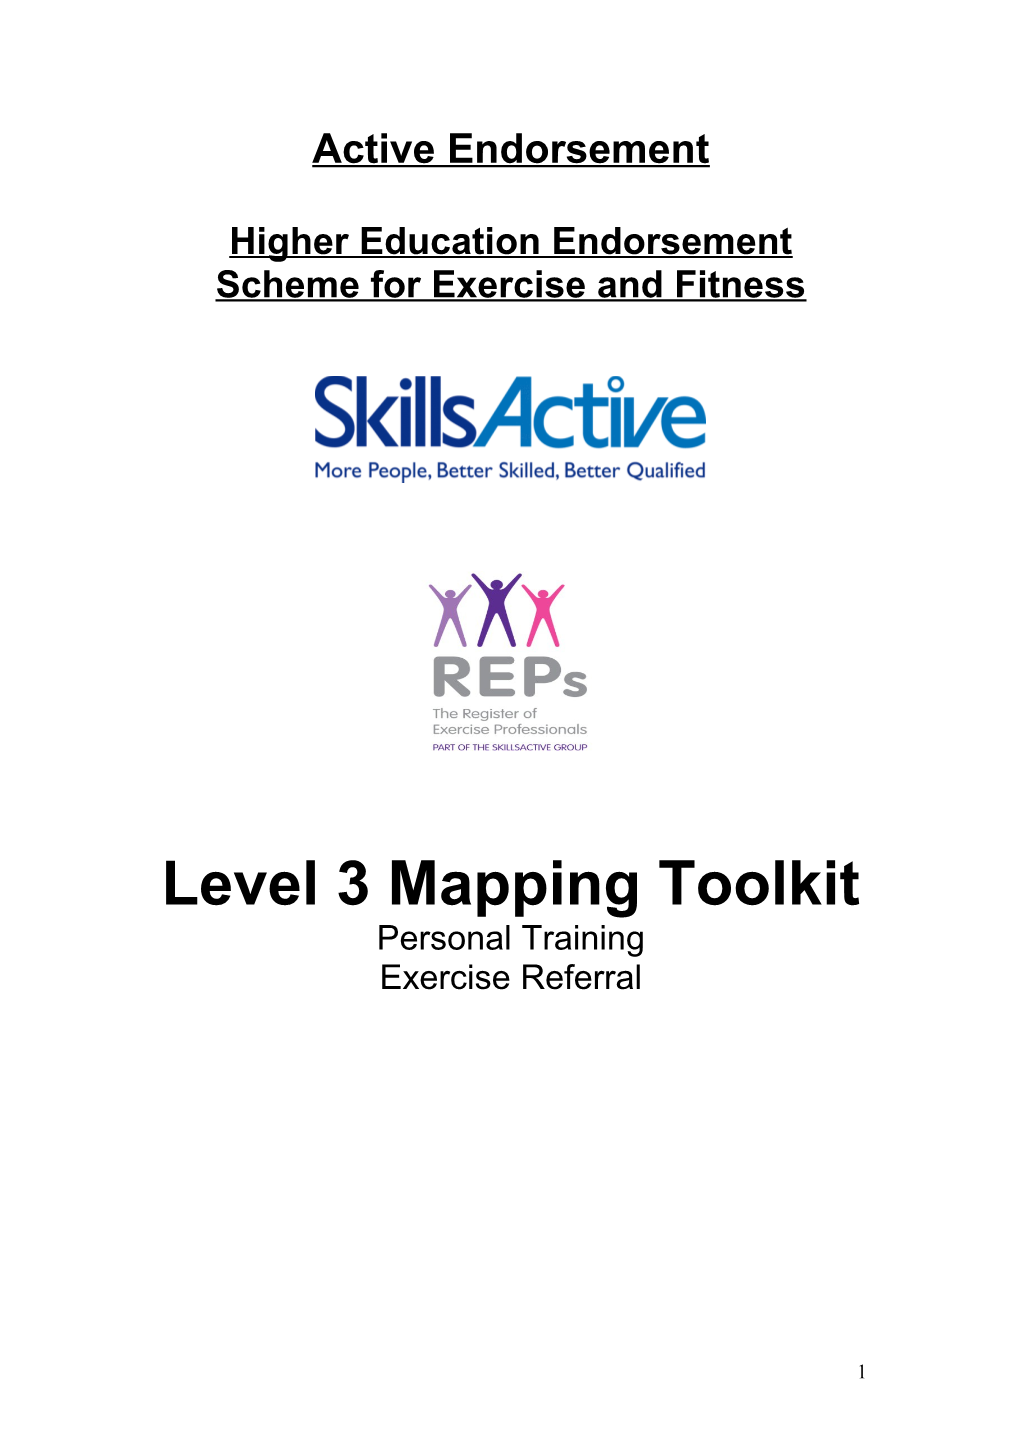 Higher Education Endorsement Scheme for Exercise and Fitness